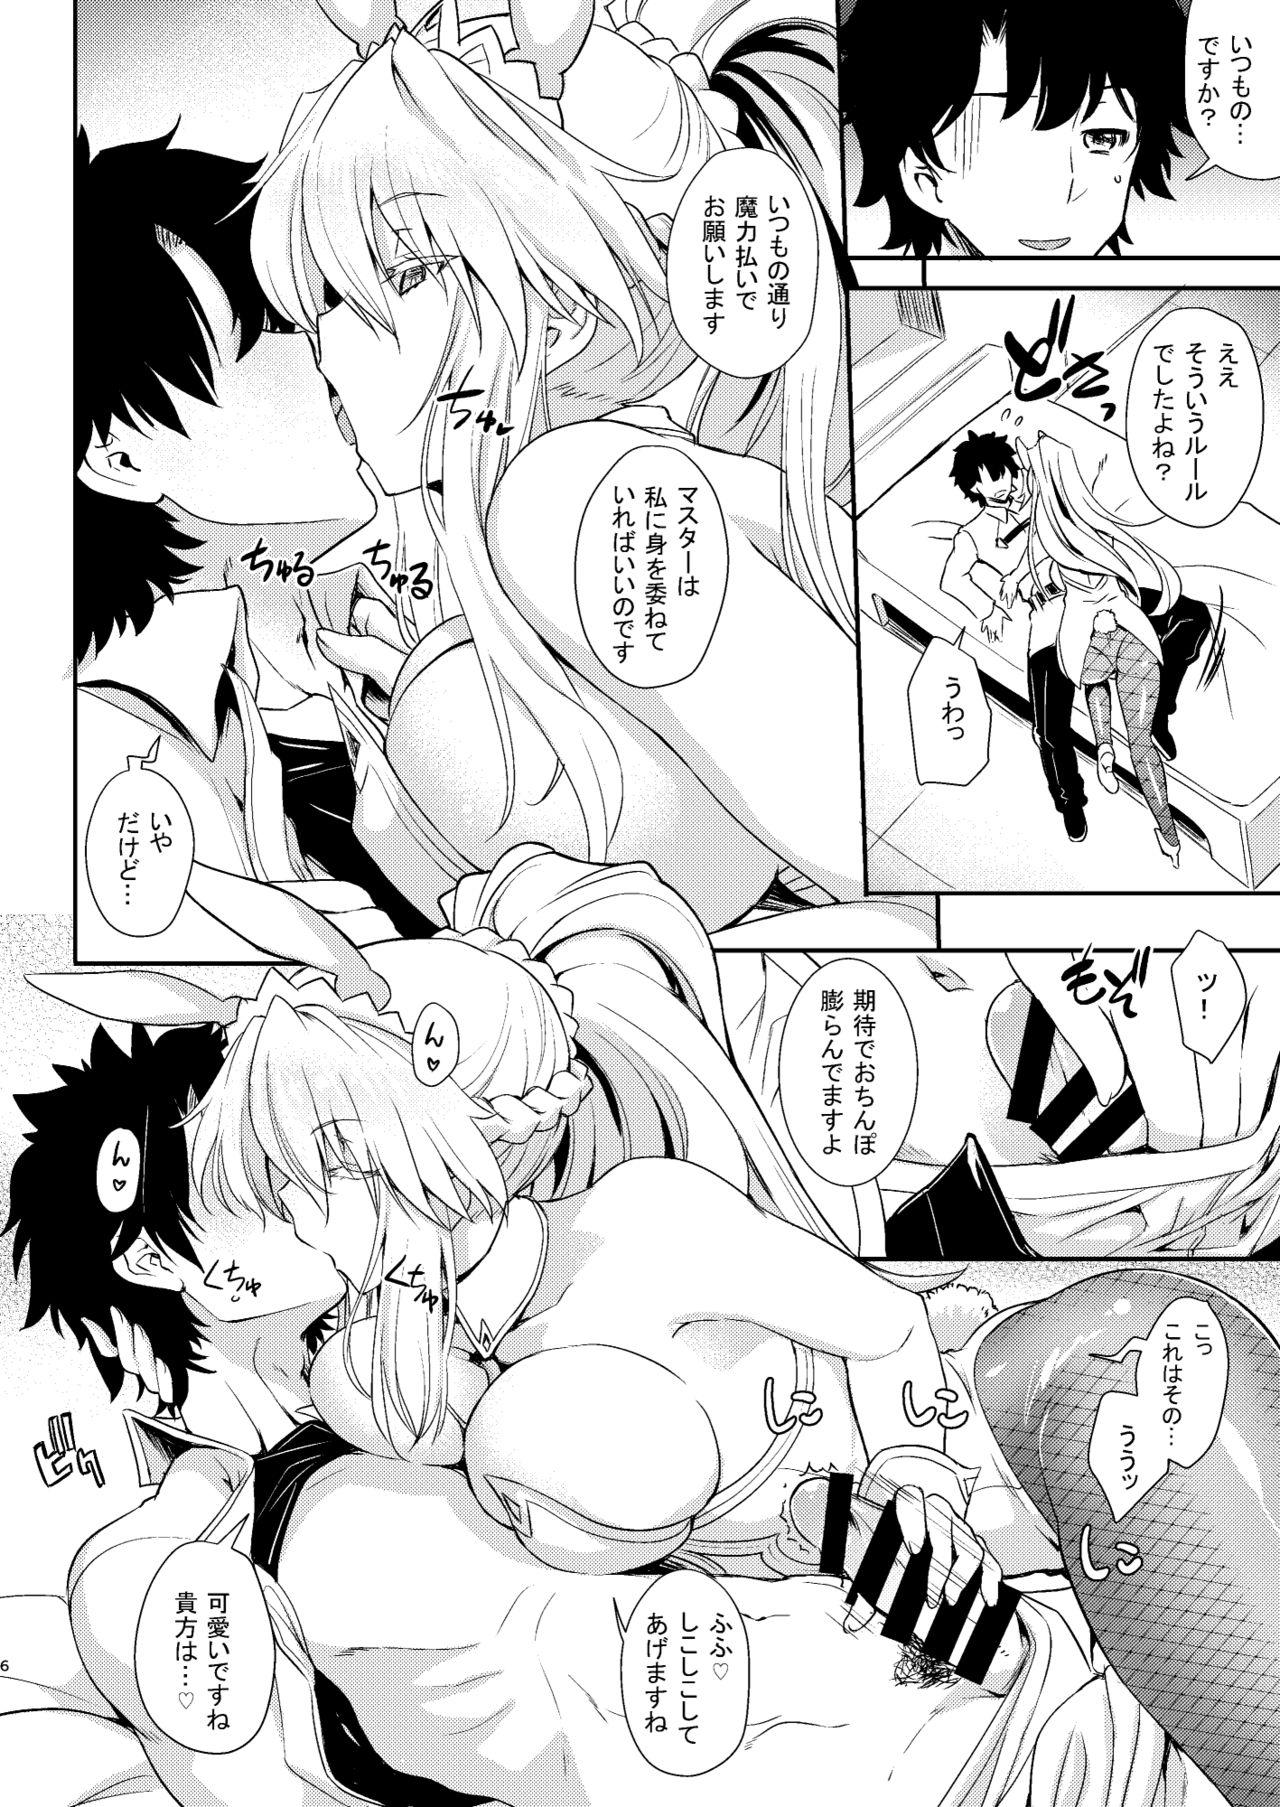 Amateur Porn Place your bets please - Fate grand order Freckles - Page 6